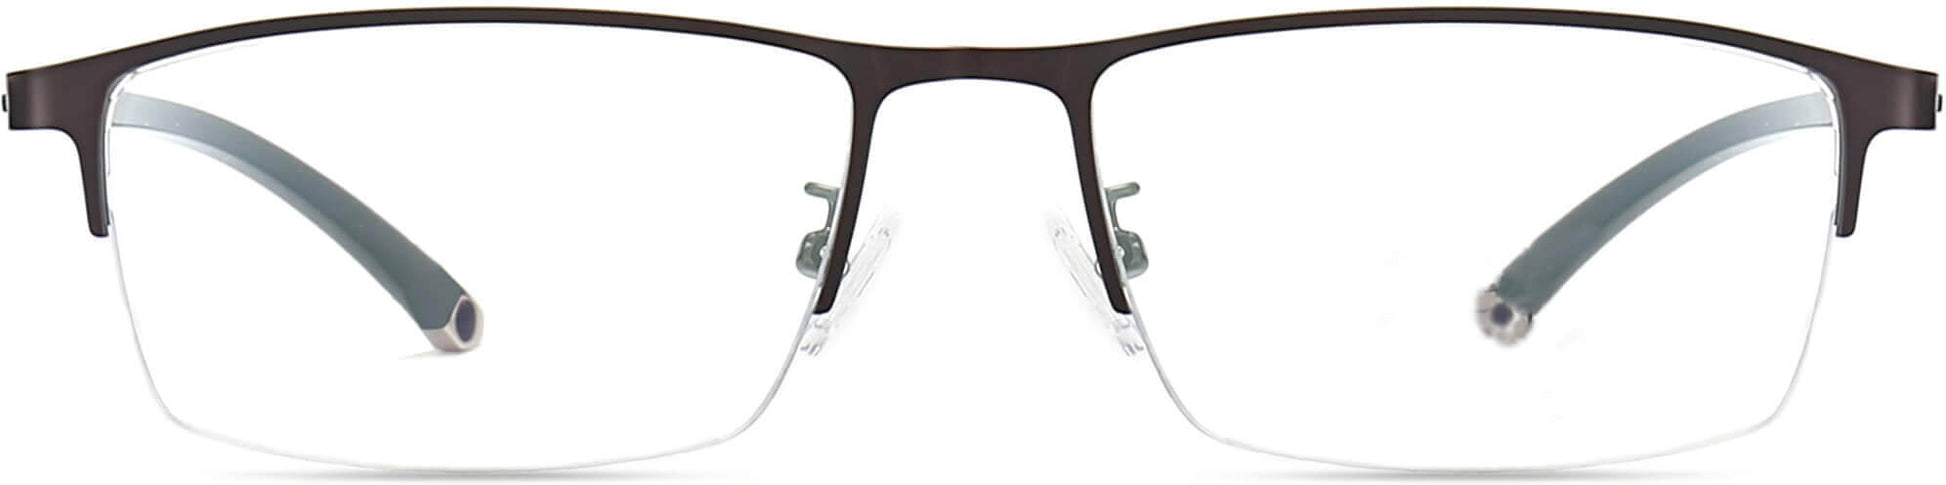 Khalil Rectangle Black Eyeglasses from ANRRI, front view